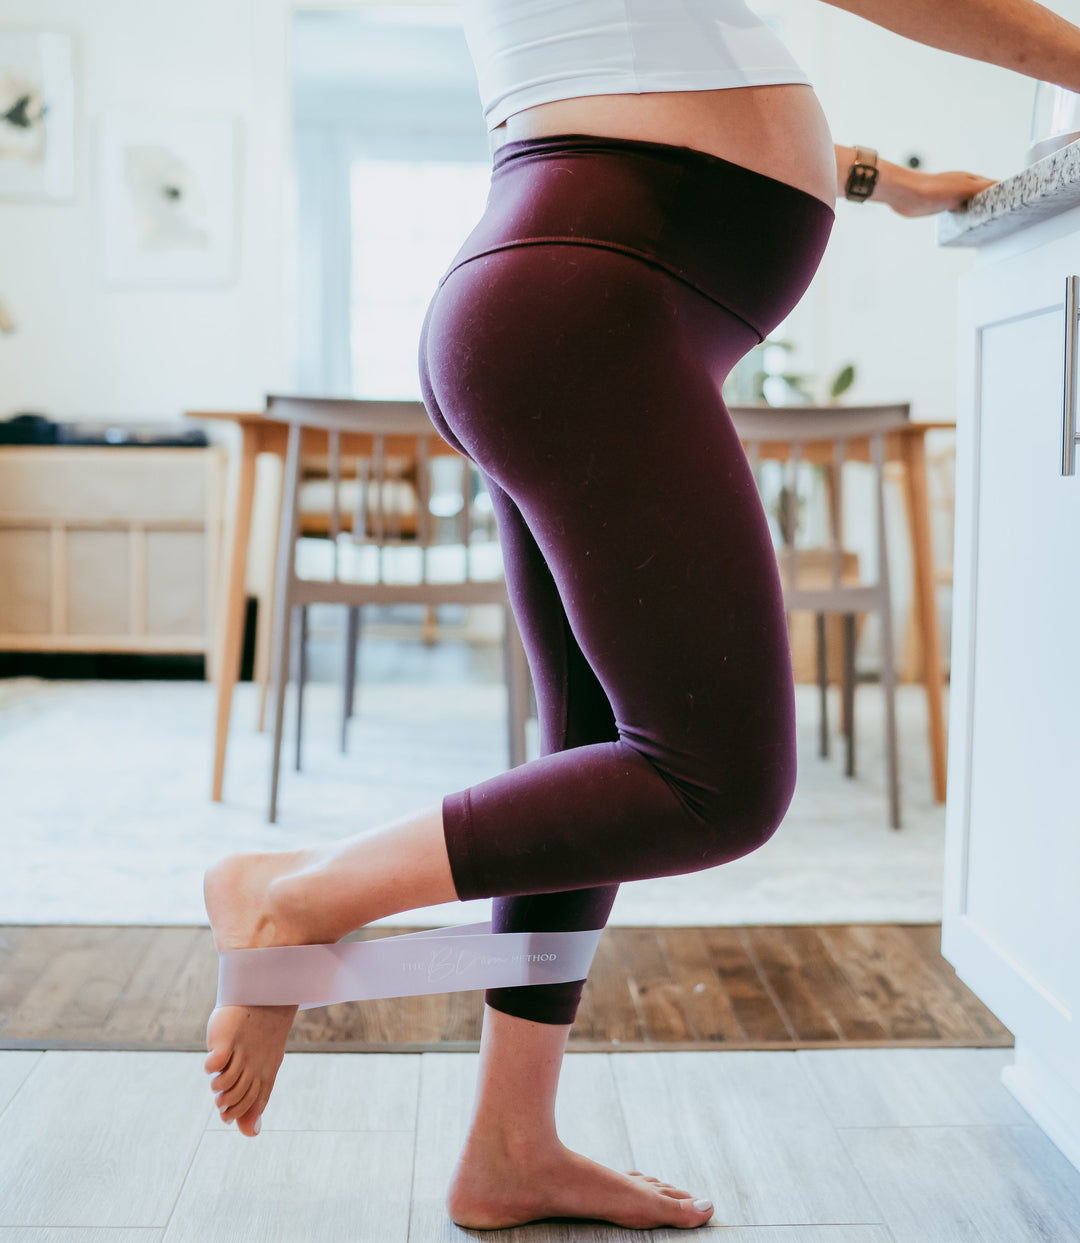 Glute Exercises for Pregnancy and Postpartum